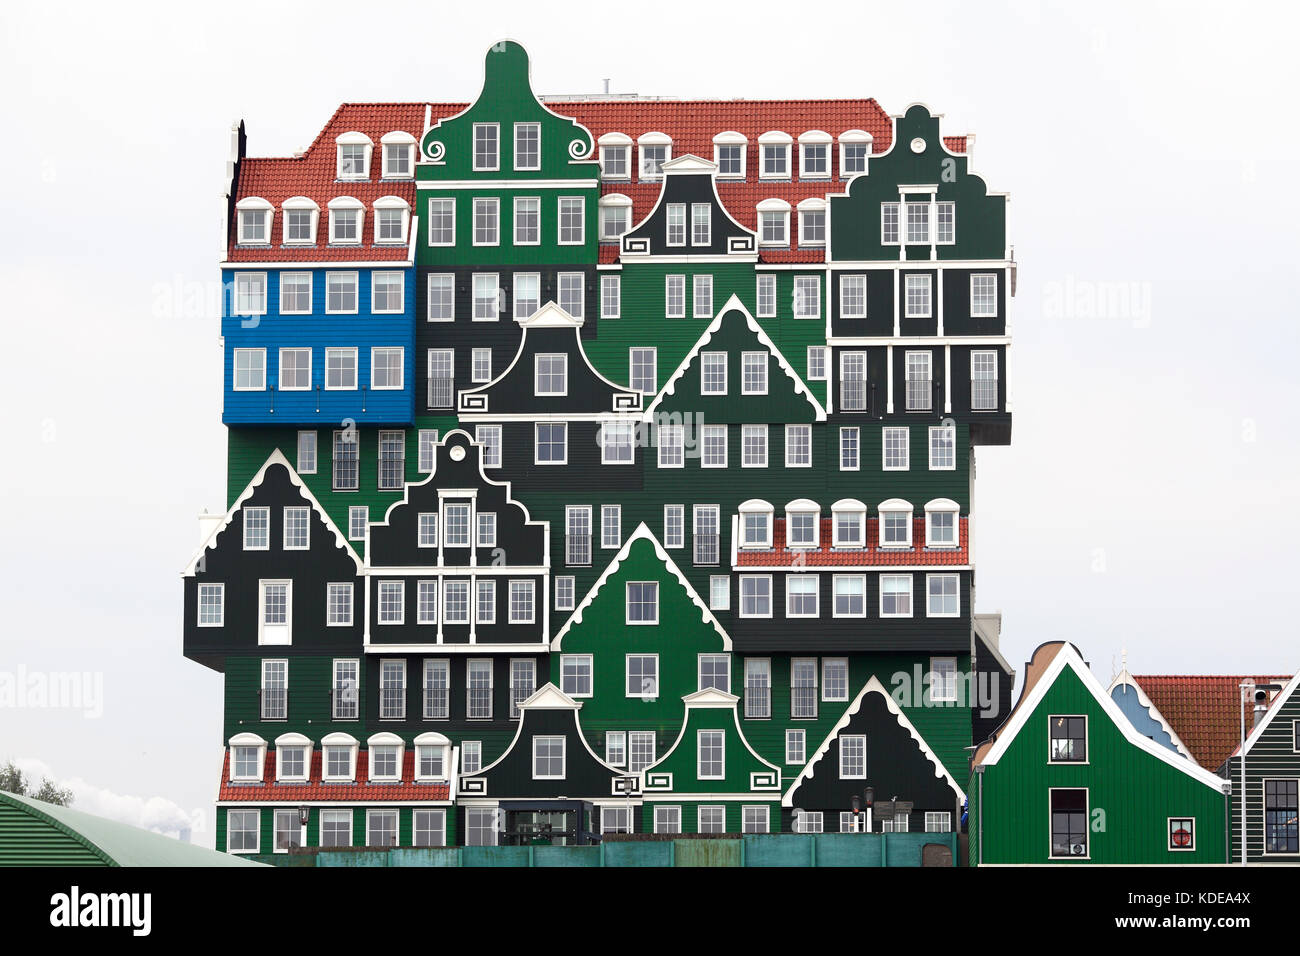 The Inntel Hotel, Zaandam – a quirky building with wooden facades designed to look like a stack of traditional Dutch houses. Zany Zaandam! Stock Photo